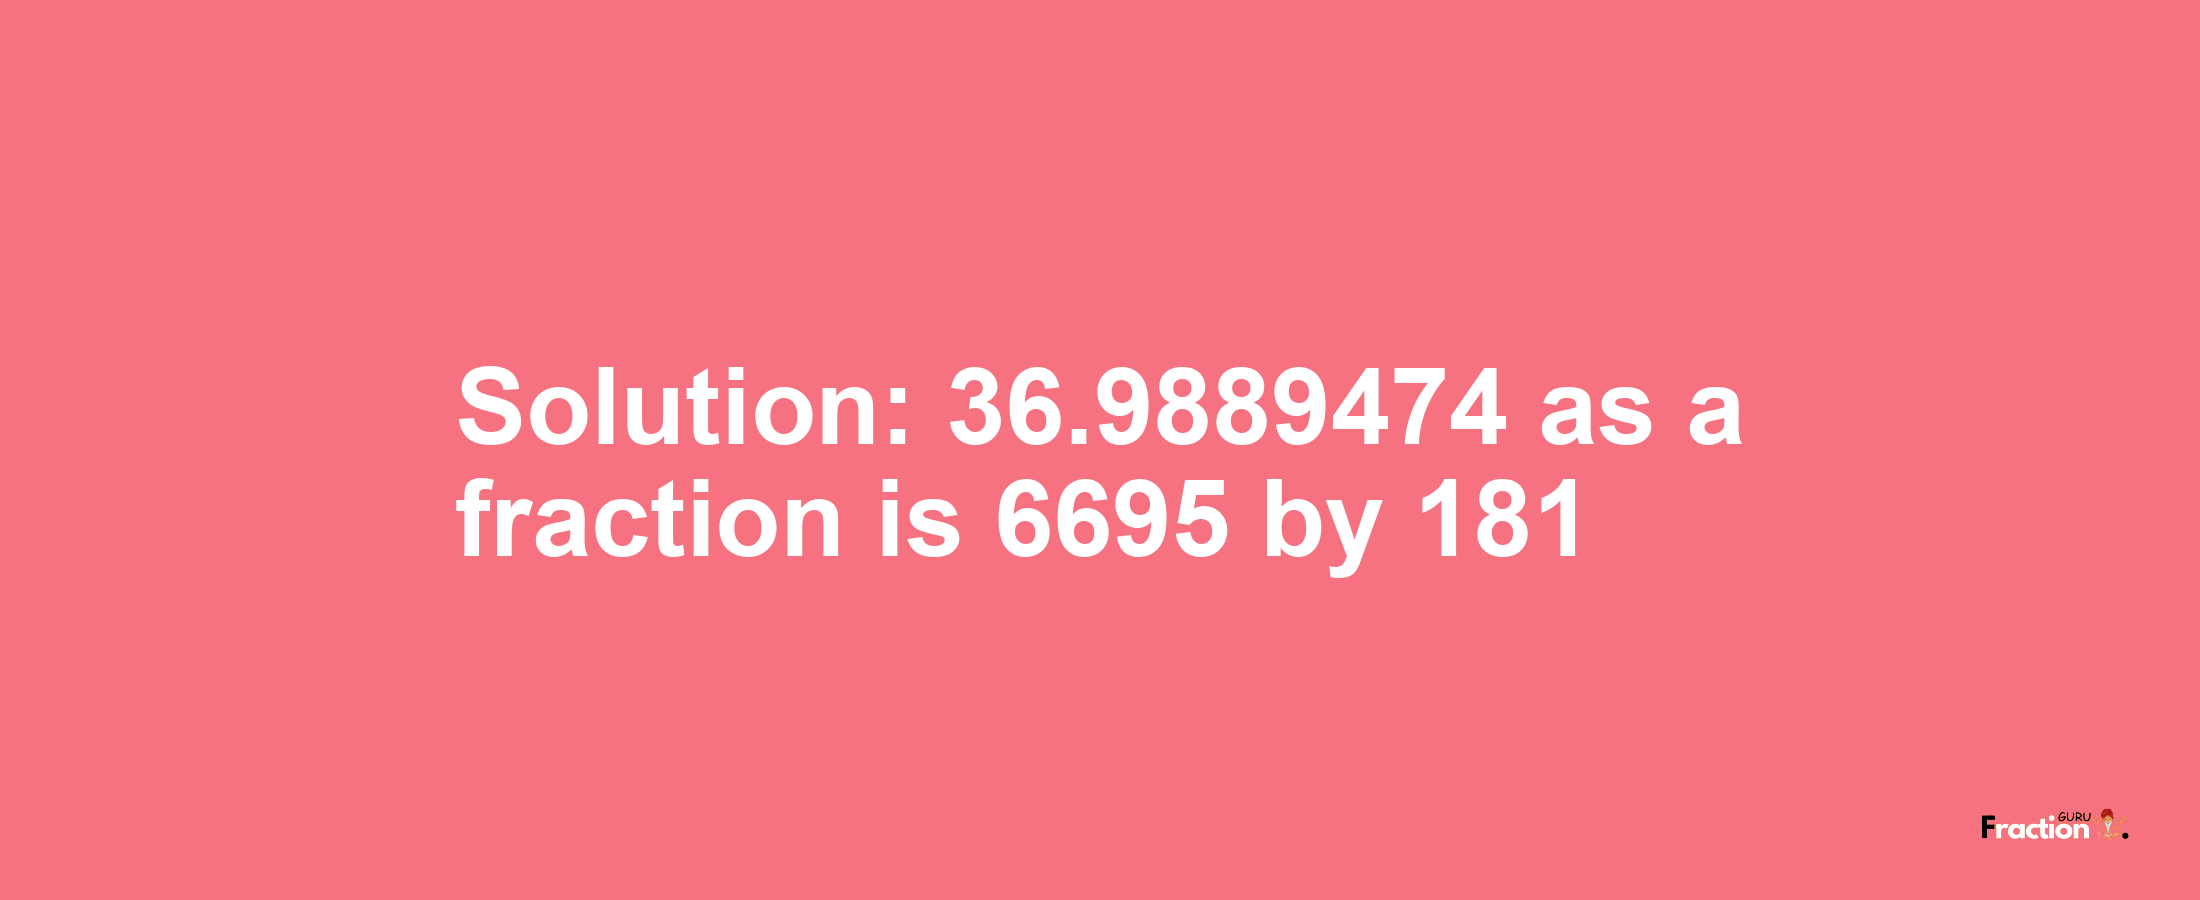 Solution:36.9889474 as a fraction is 6695/181